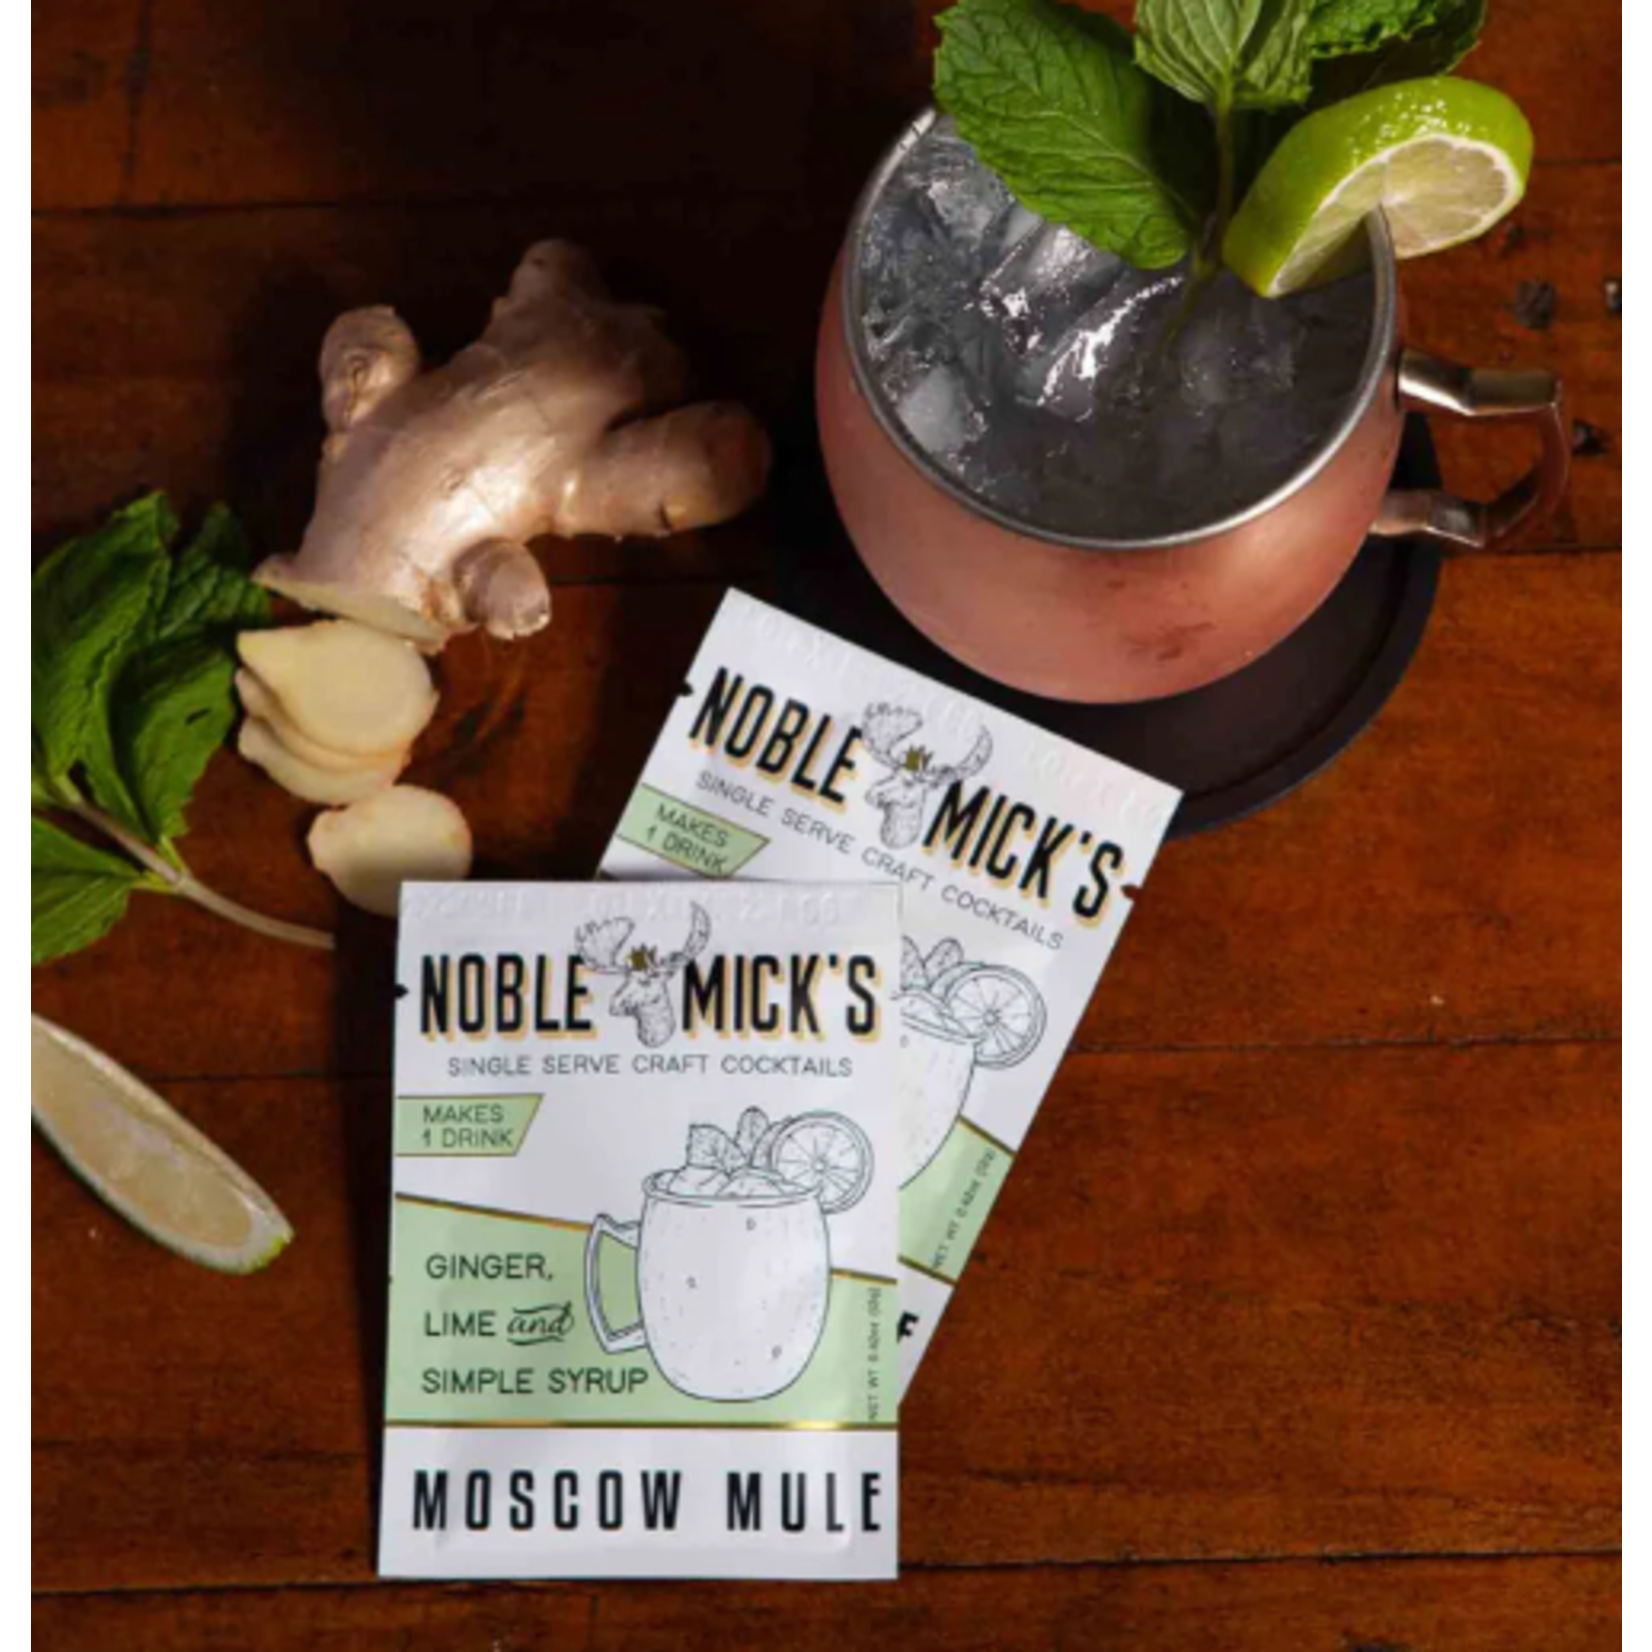 MOSCOW MULE COCKTAIL MIX